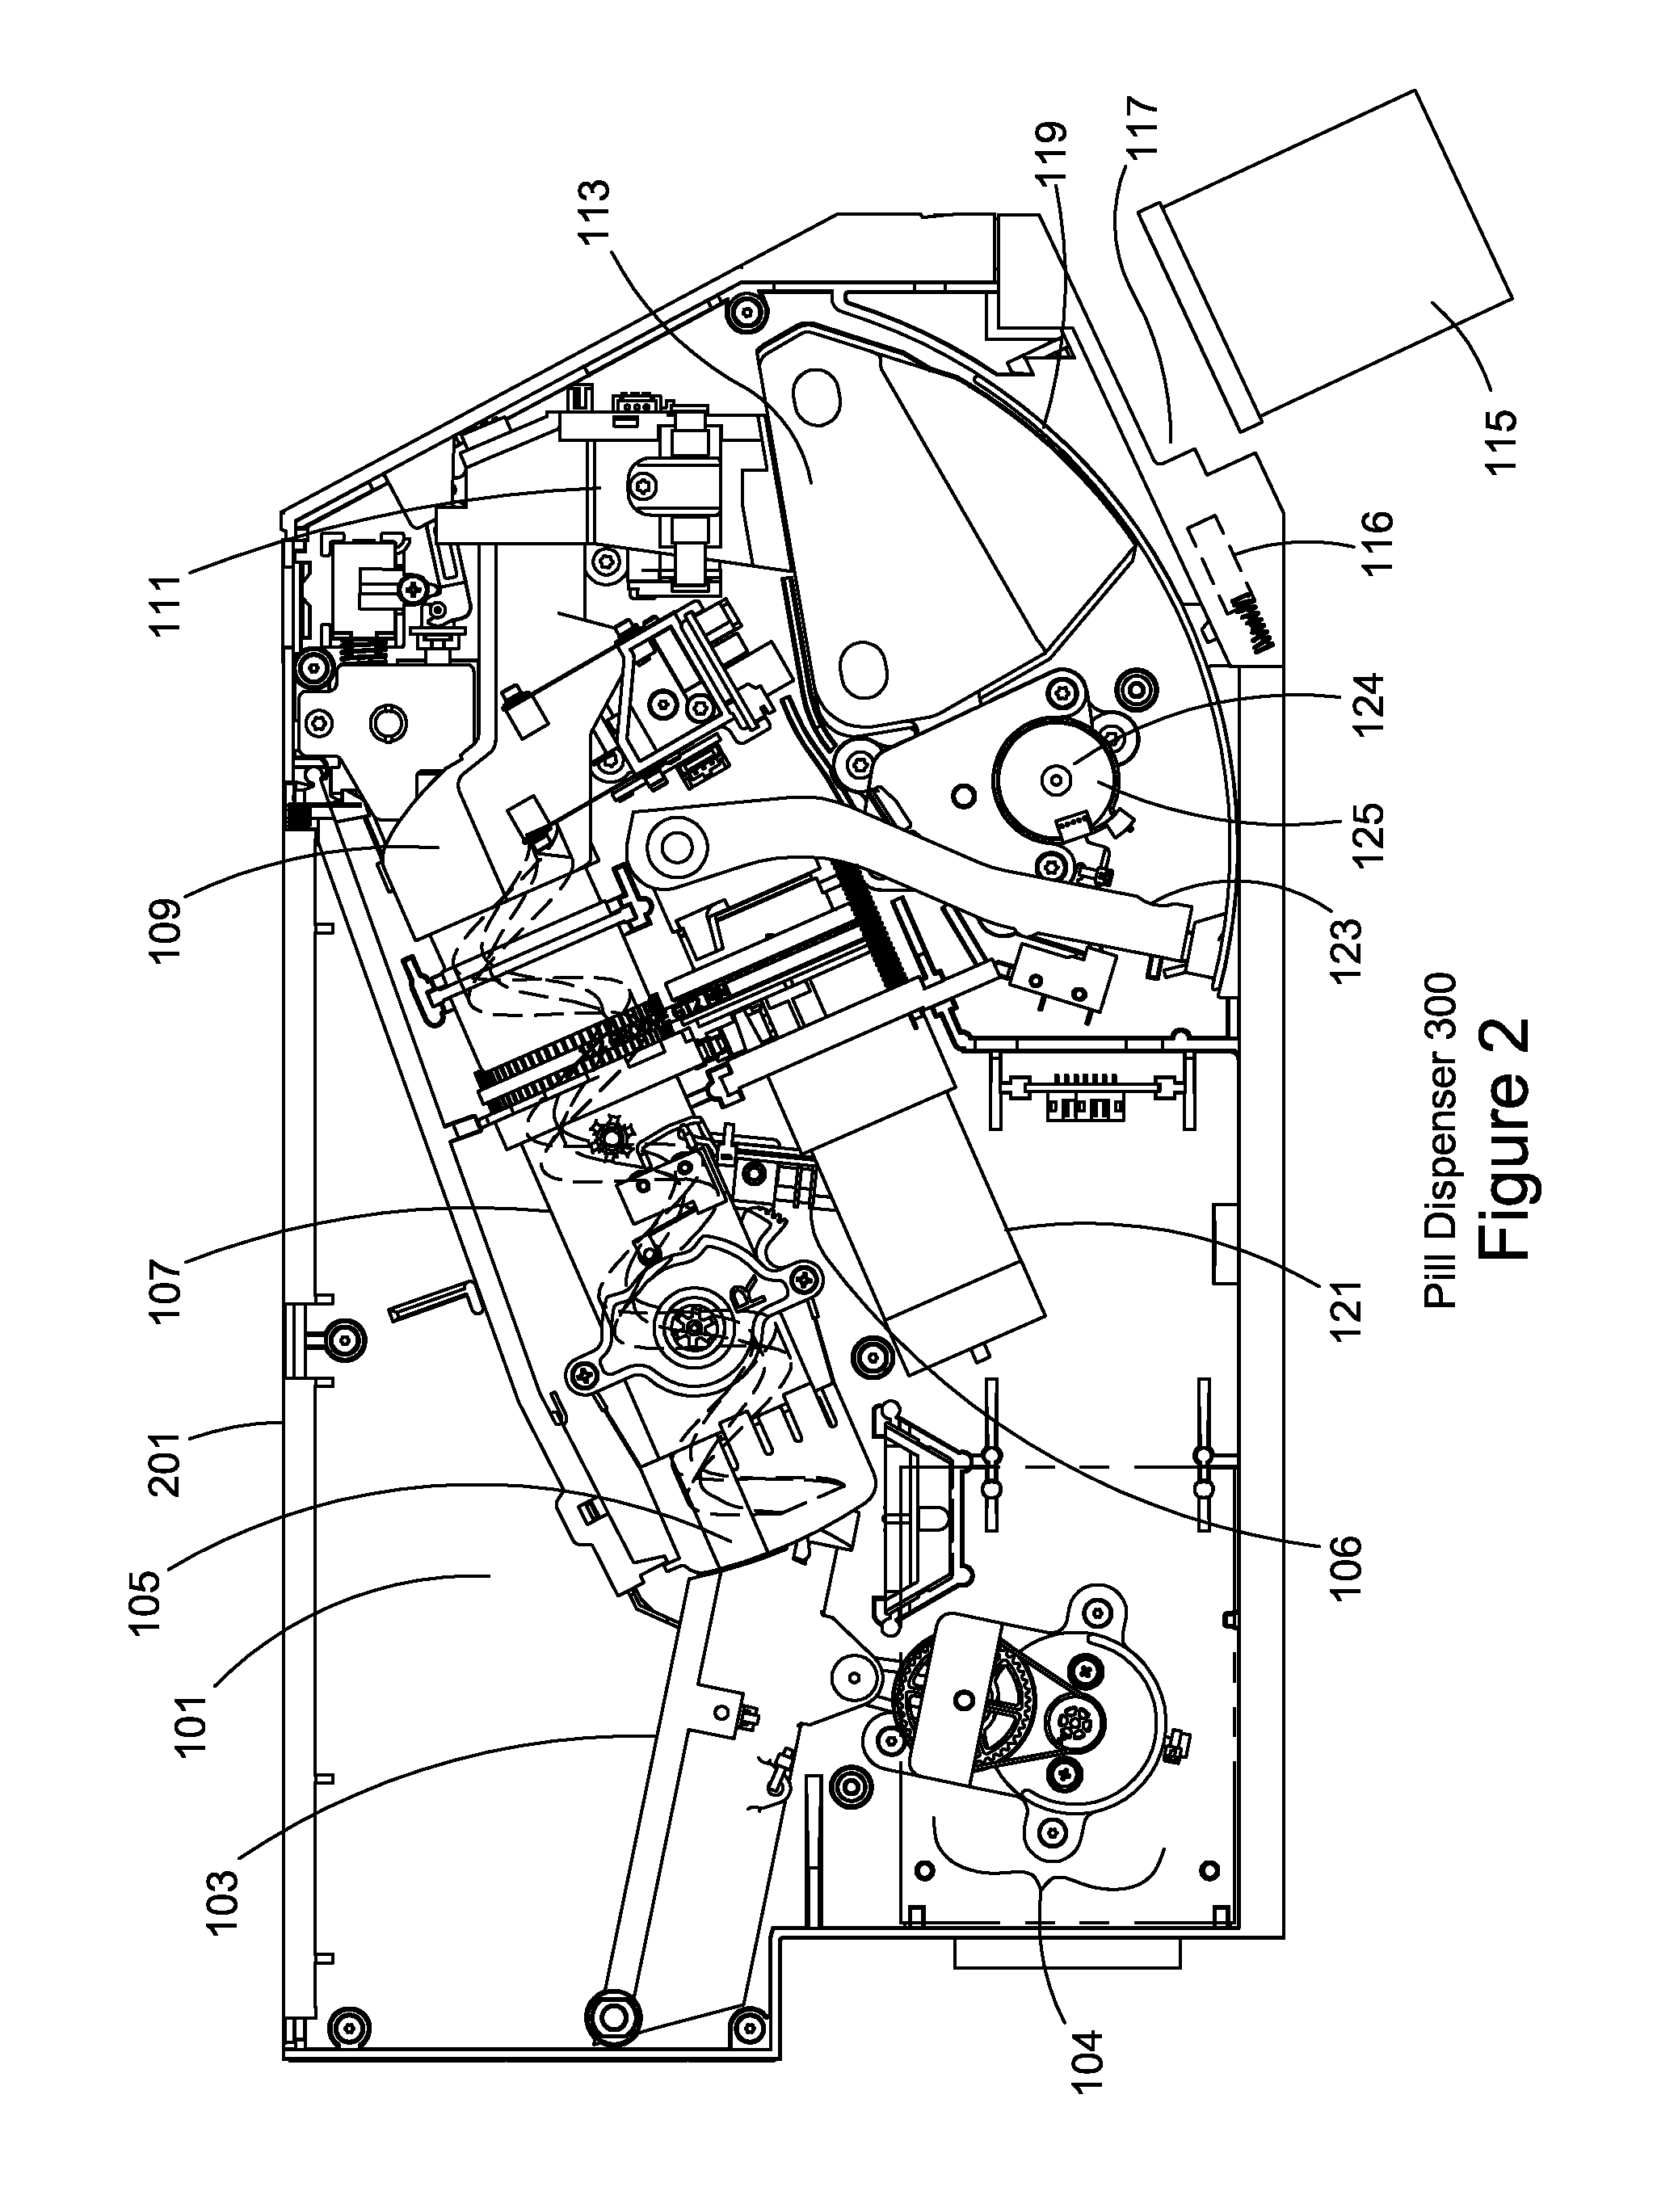 Apparatus for counting and dispensing pills using multi-staged pill singulation